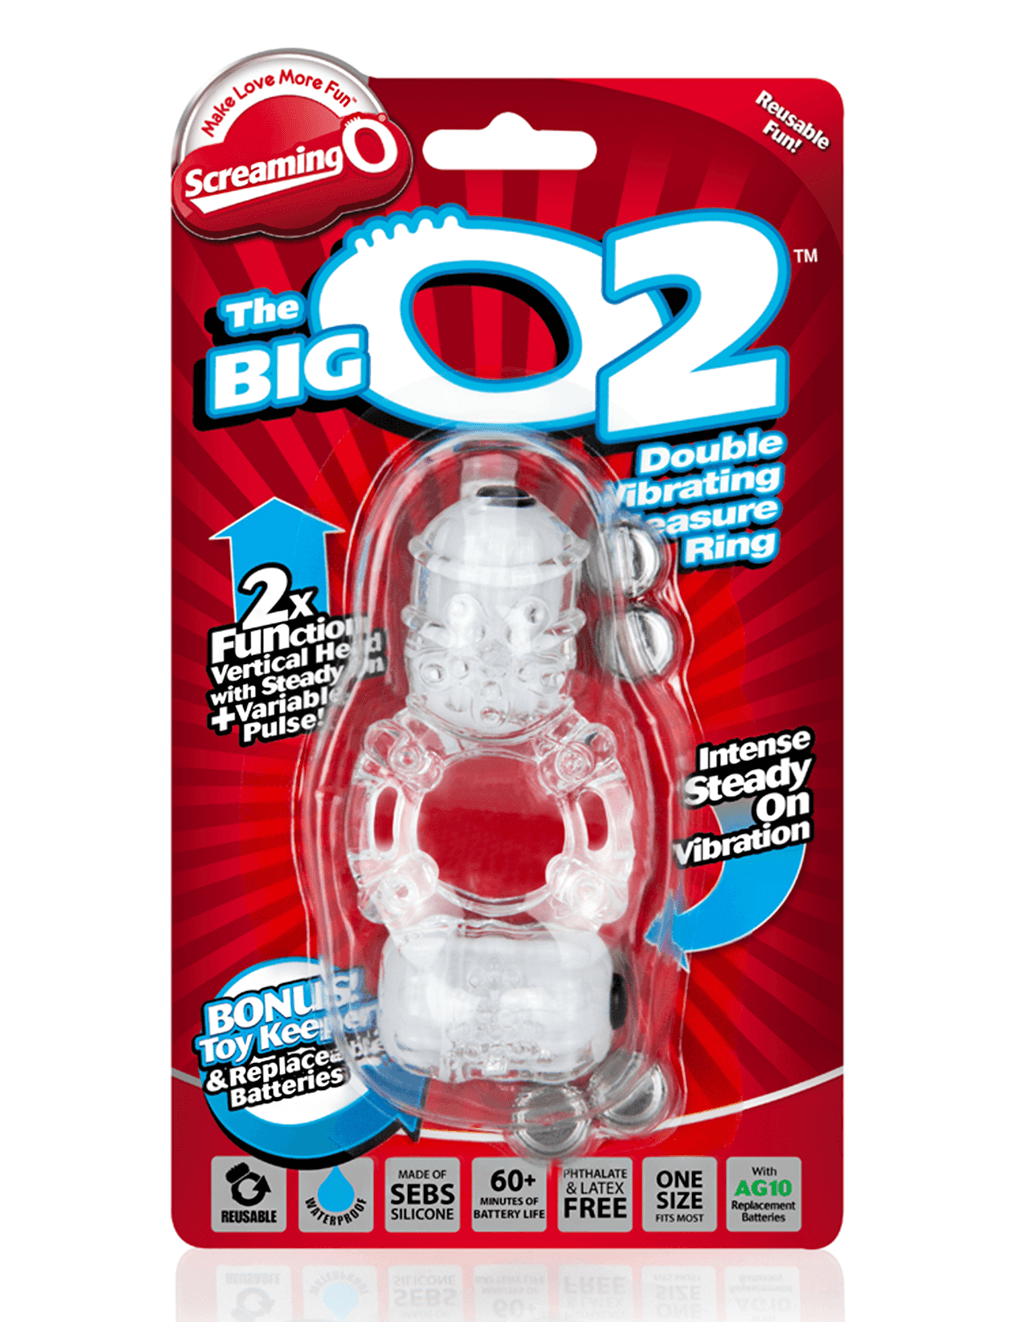 Screaming O The Big O 2 Double Vibrating Cockring - Package